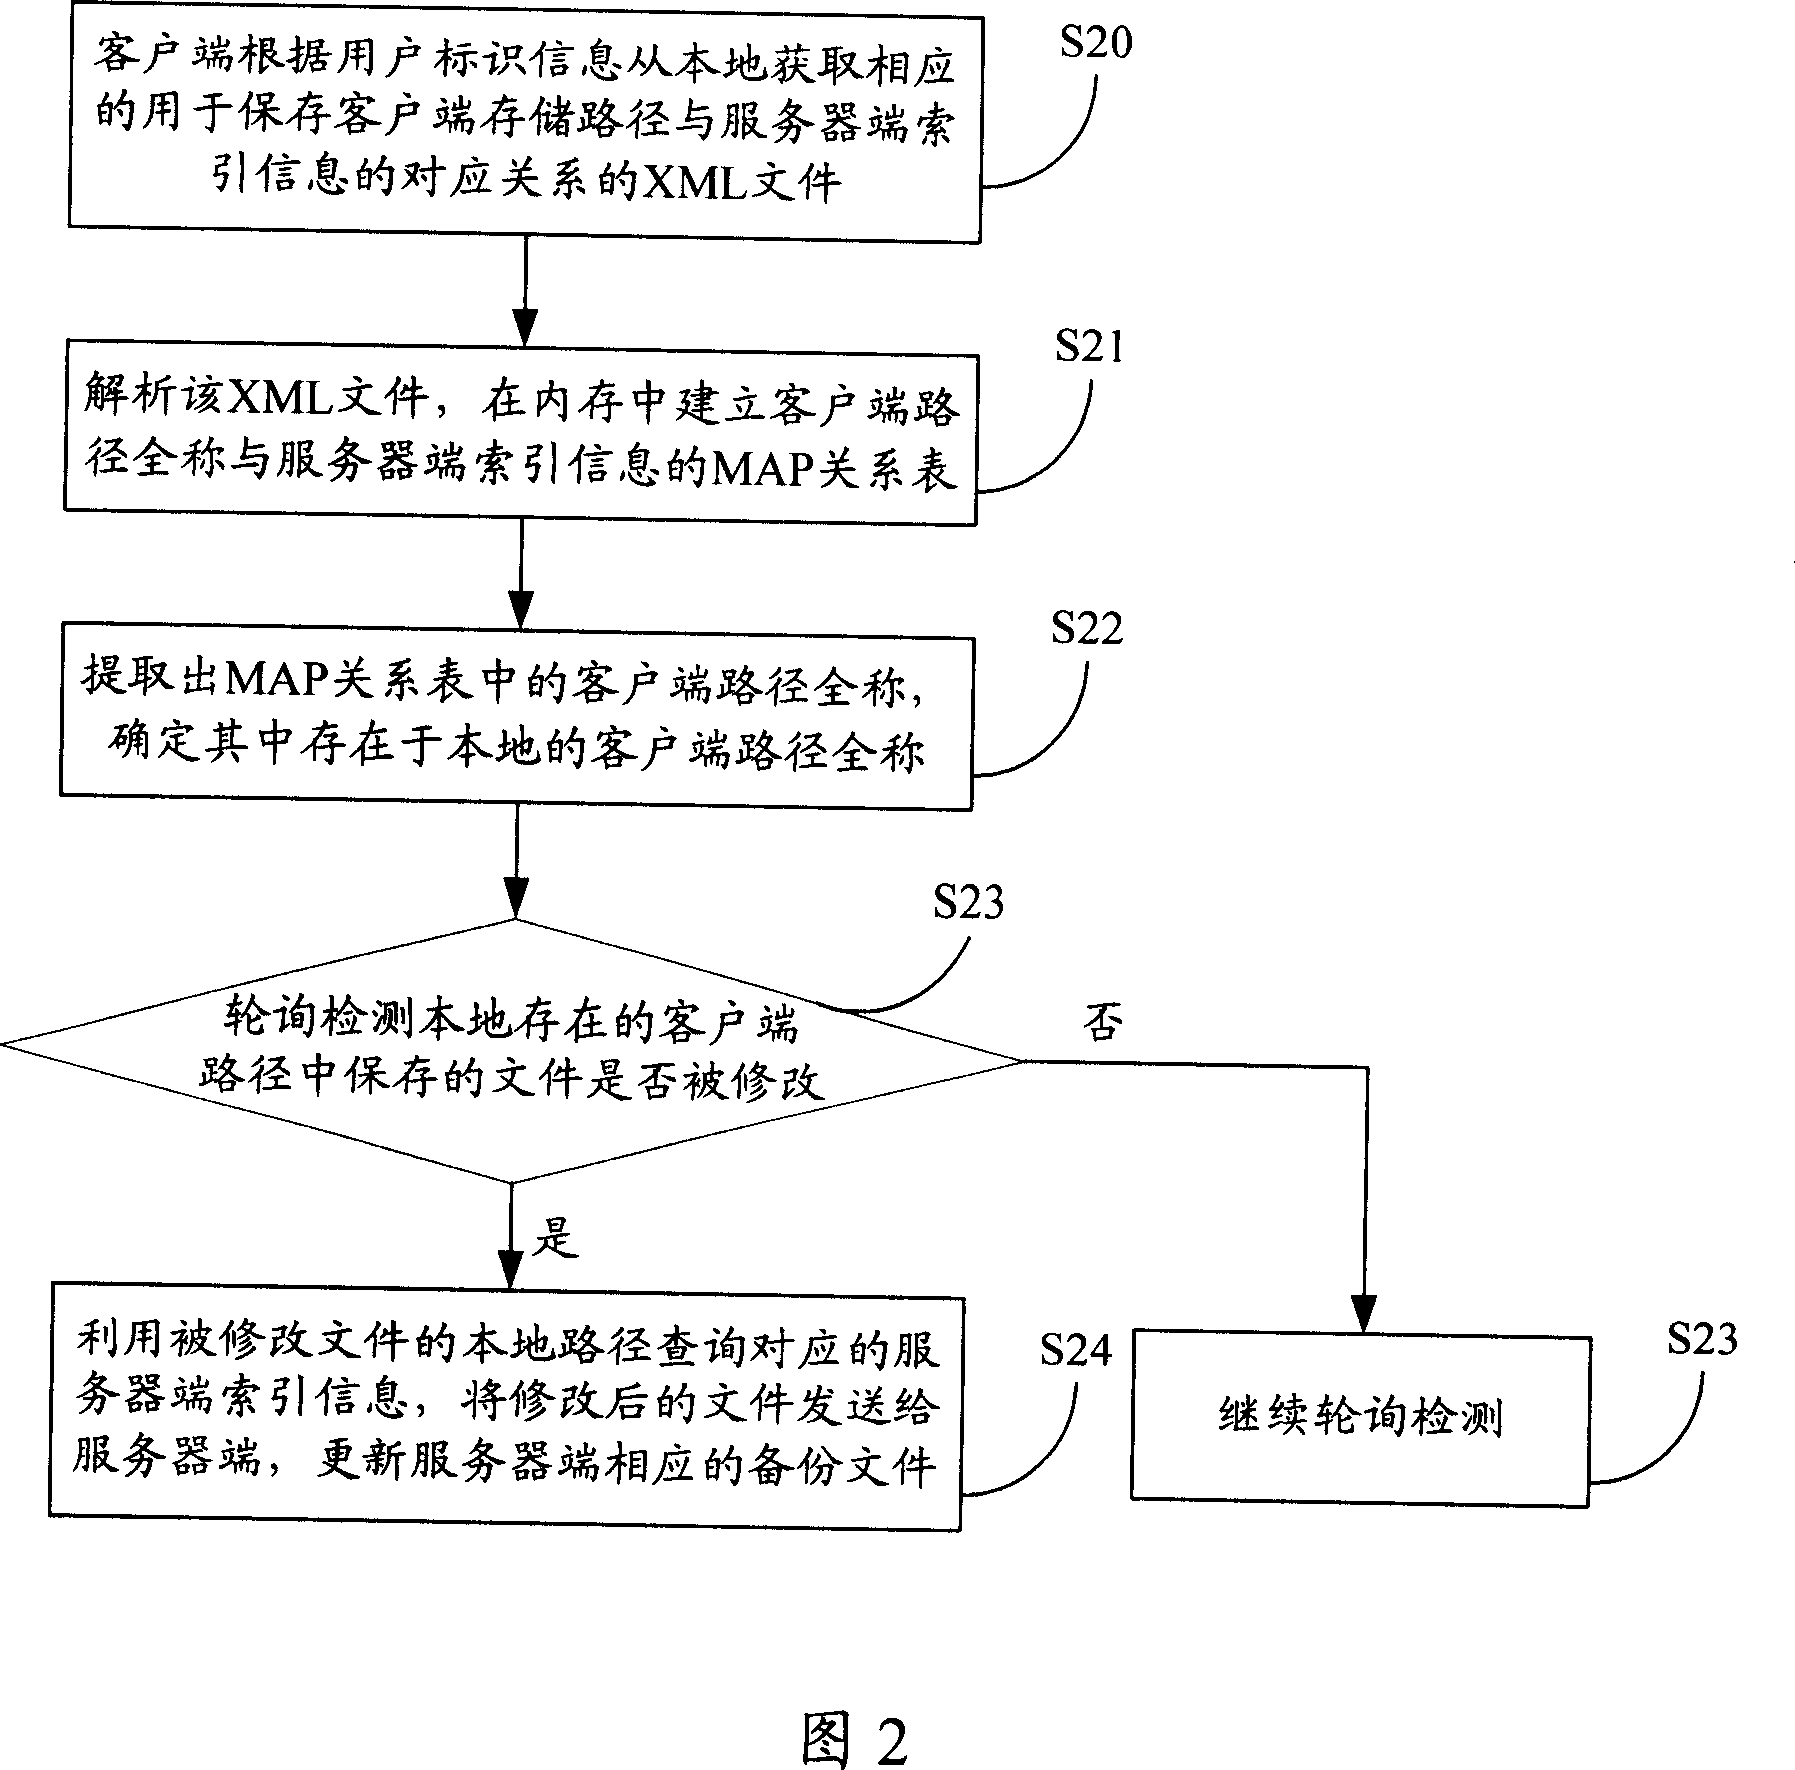 Synchronous method, system for file storage and customer terminal